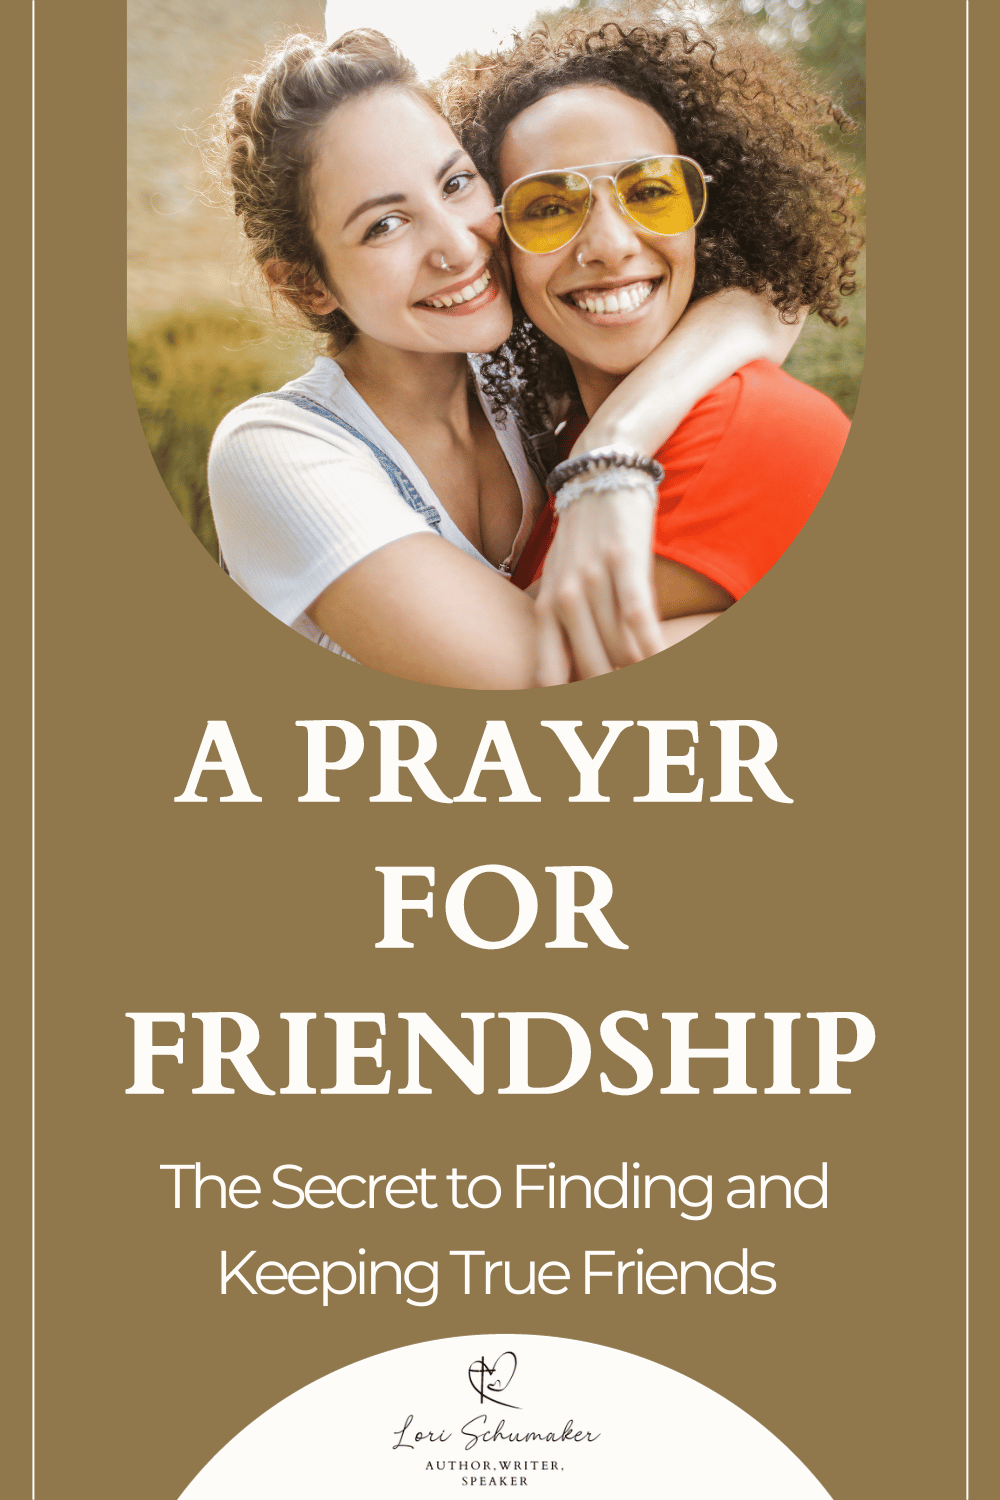 We were created for relationship. Yet it is so challenging to build meaningful friendships with people from a broken world. Here is a list of ways you can start with yourself by being a good friend and a prayer for friendship that will lead you to the ultimate friendship builder - Christ. 